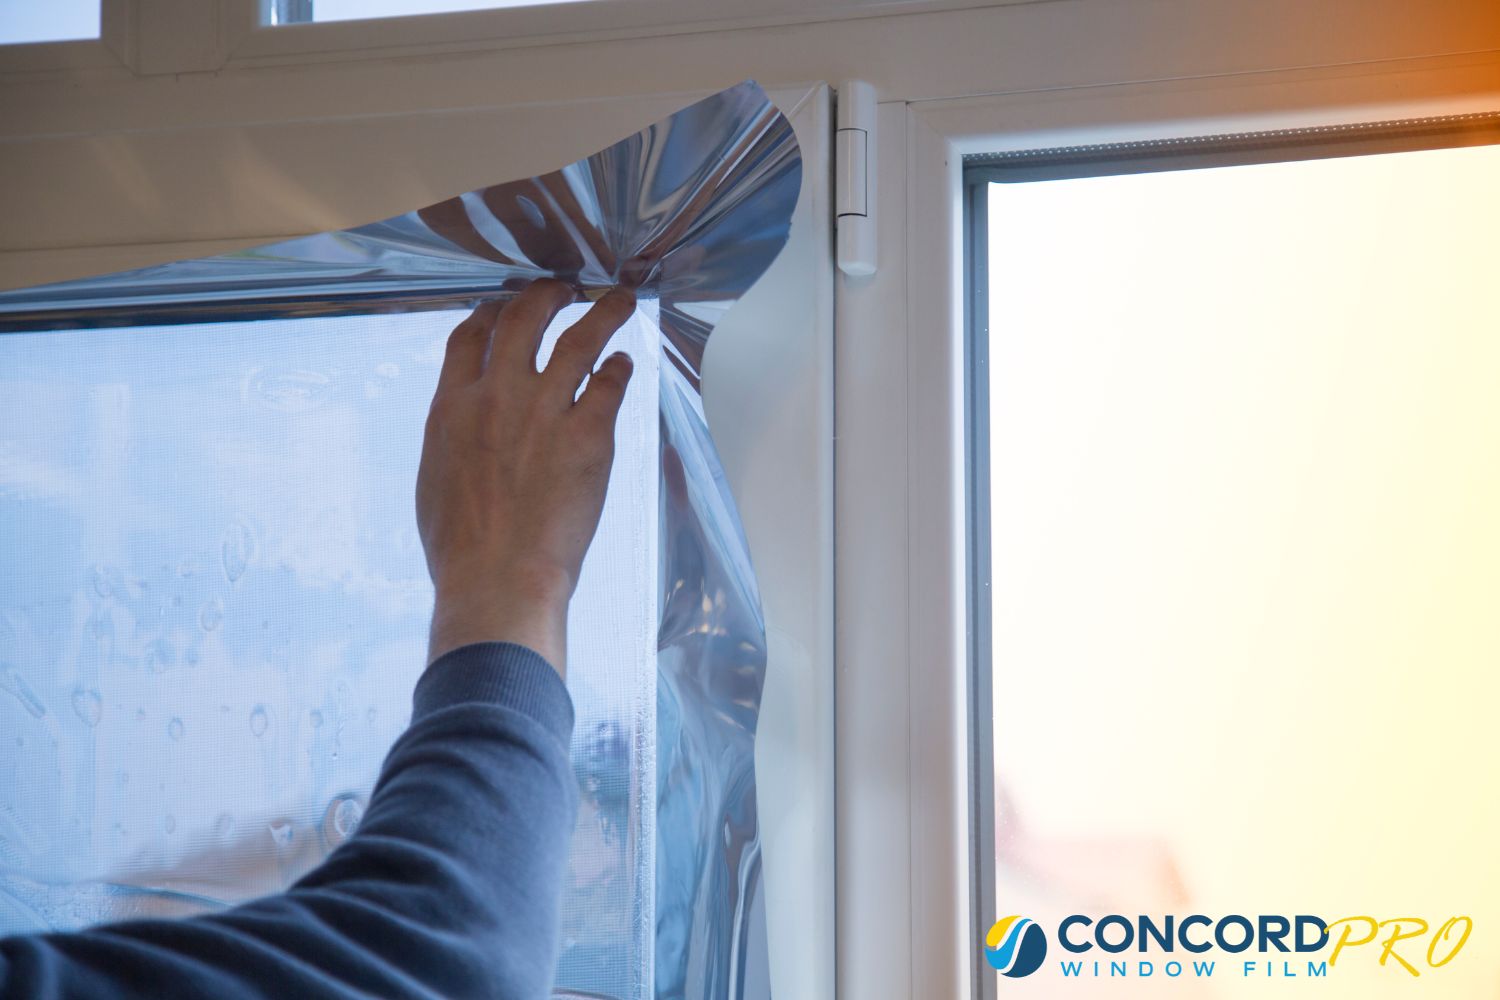 Concord Pro installing window film as an add-on service in a customer's home.